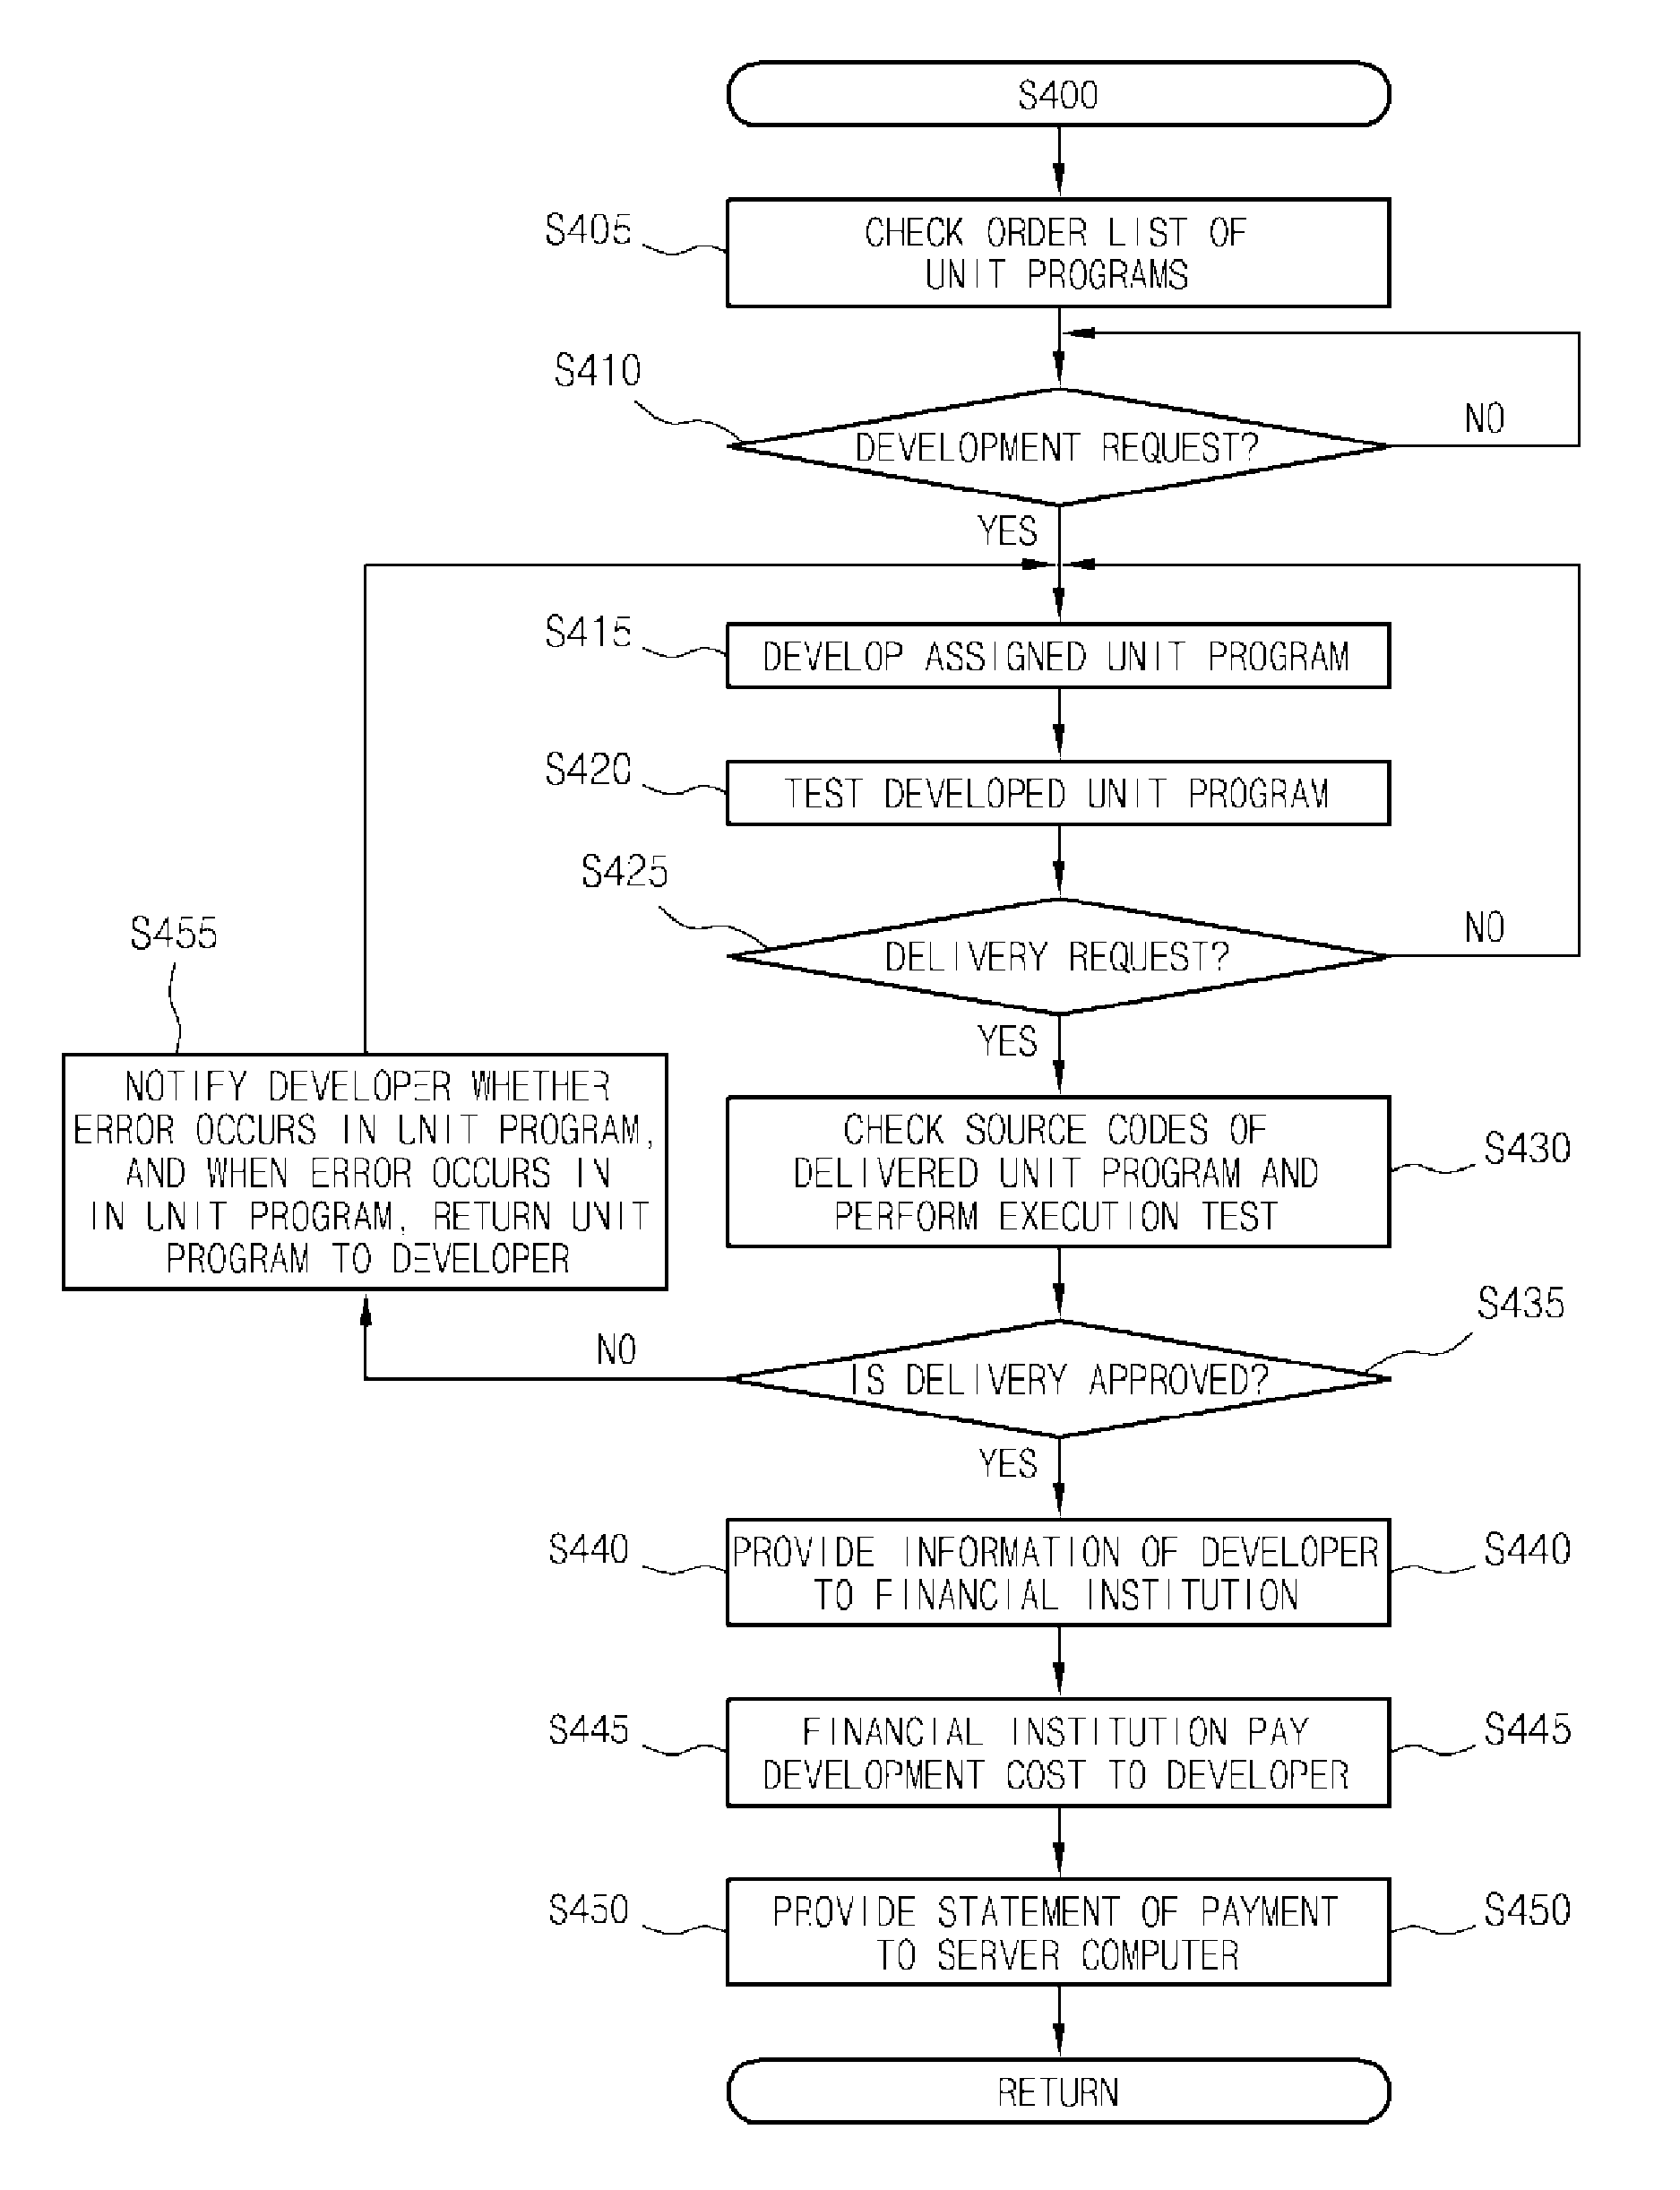 Network-based information technology solution development and management system and method